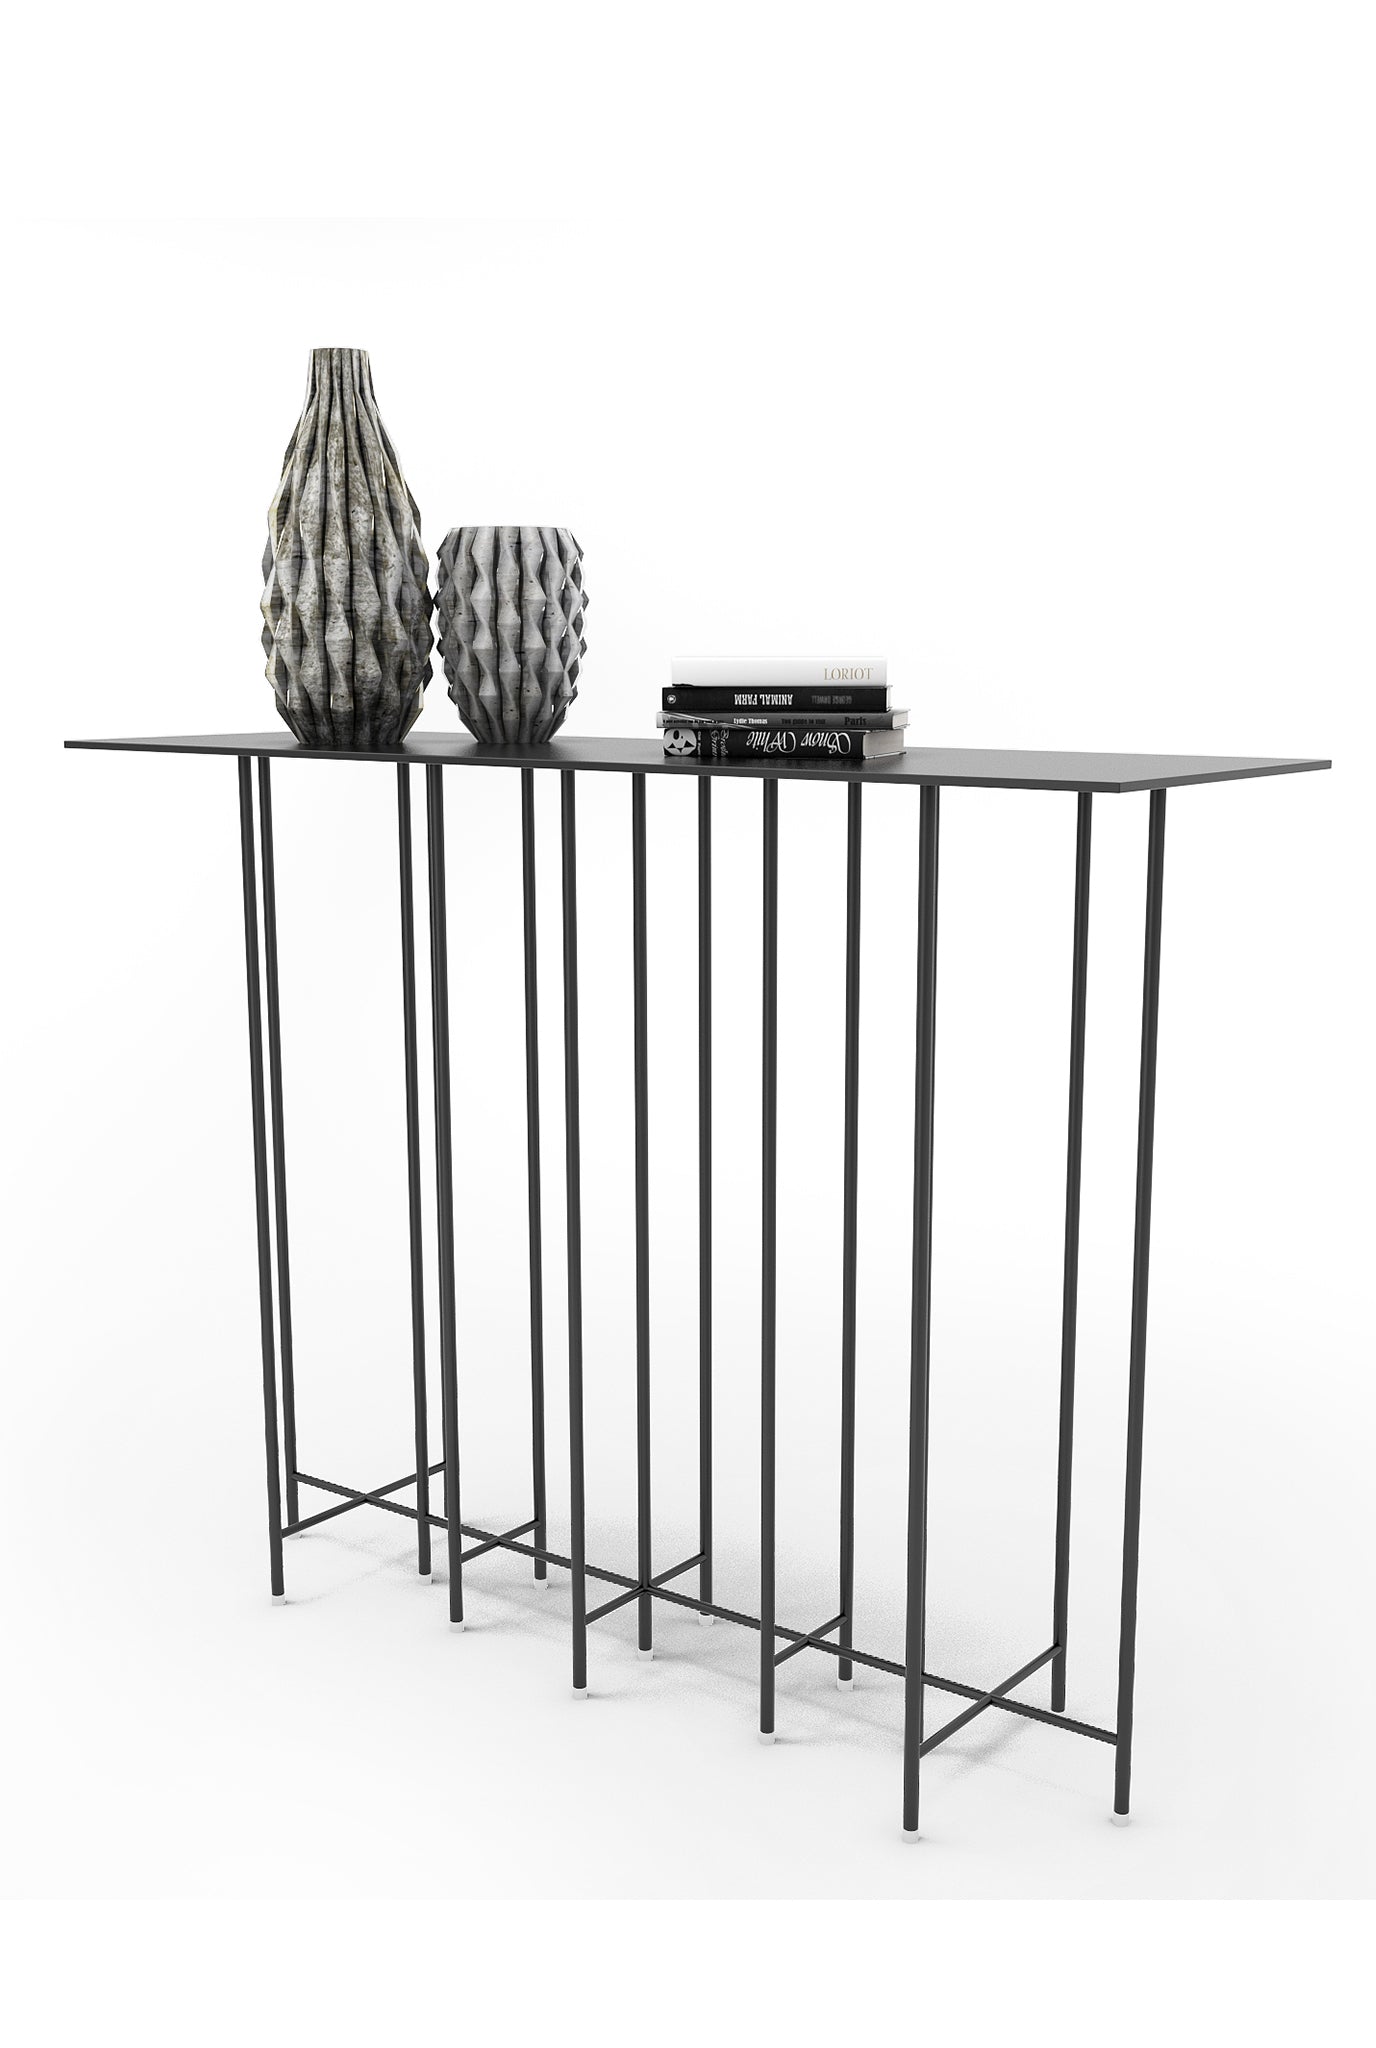 handcrafted-jodi-metal-steel-side table-accent piece-minimal-furniture